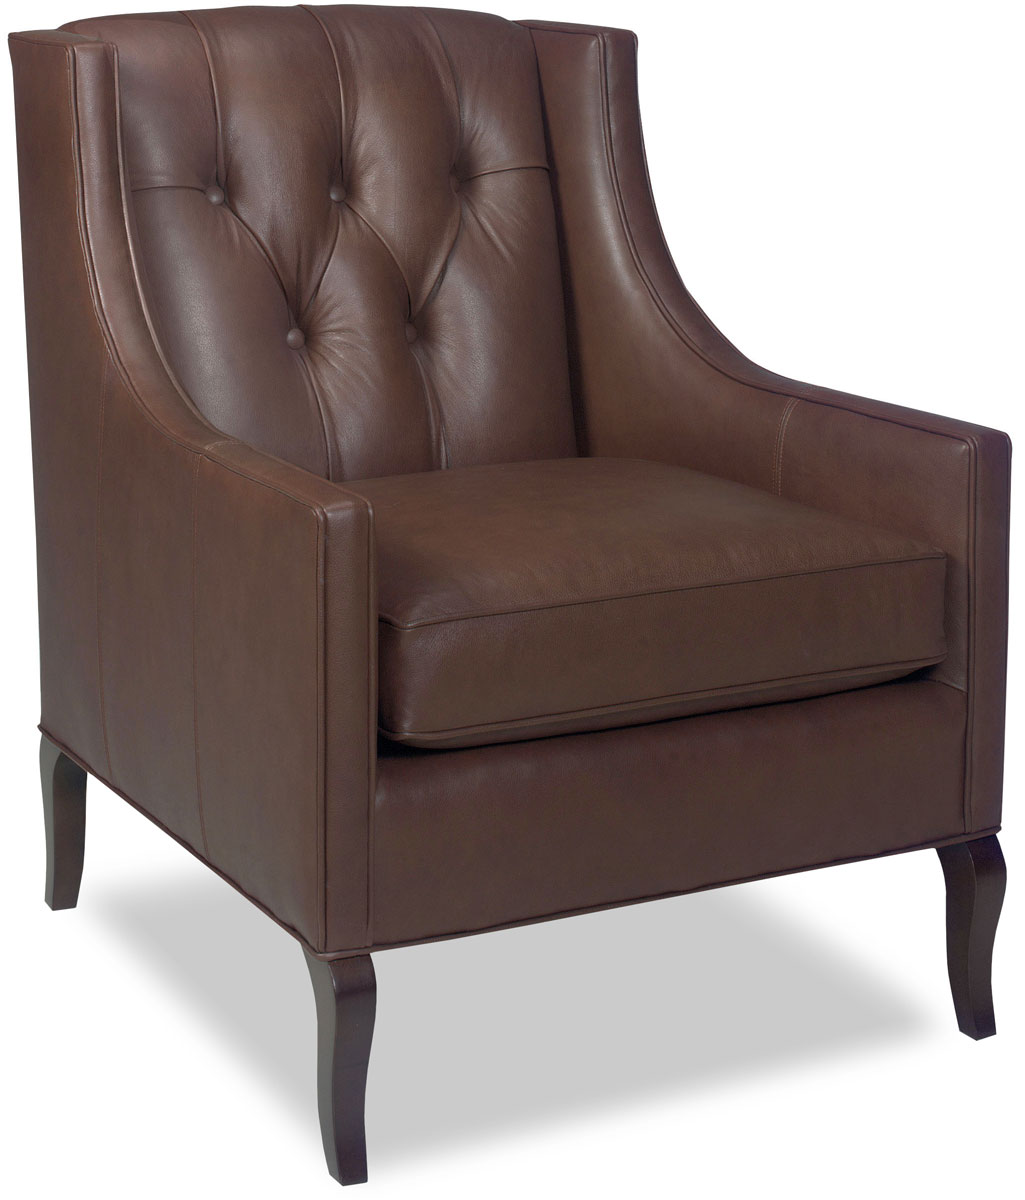 Temple Furniture 14925 Ivy Chair